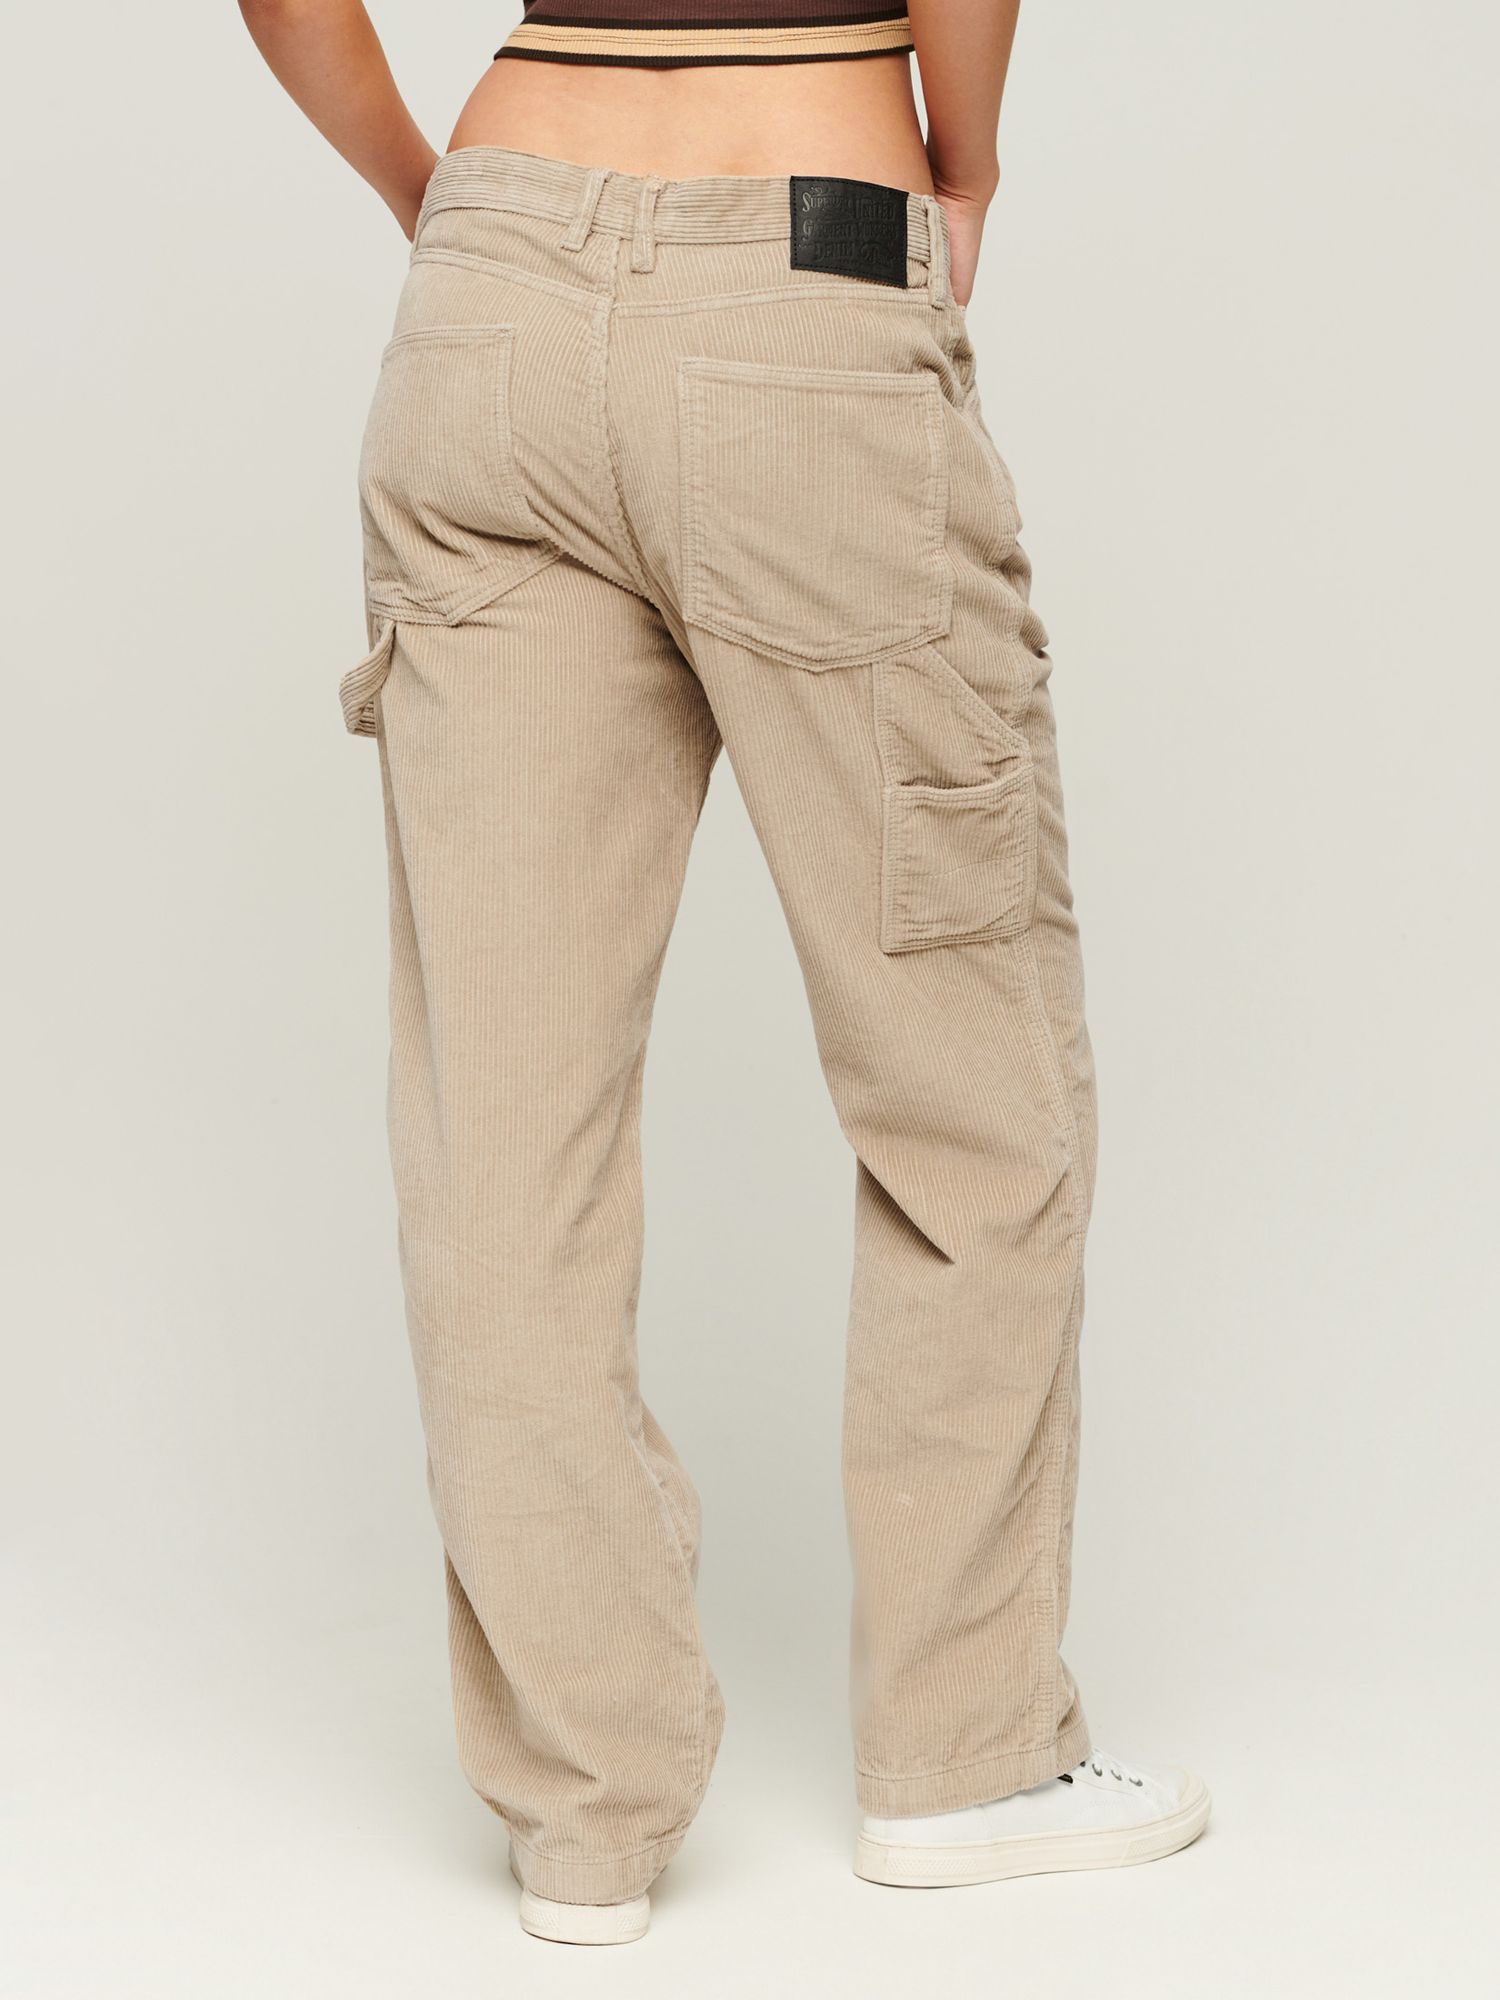 Superdry Cord Carpenter Trousers, Stone/Taupe Brown at John Lewis ...